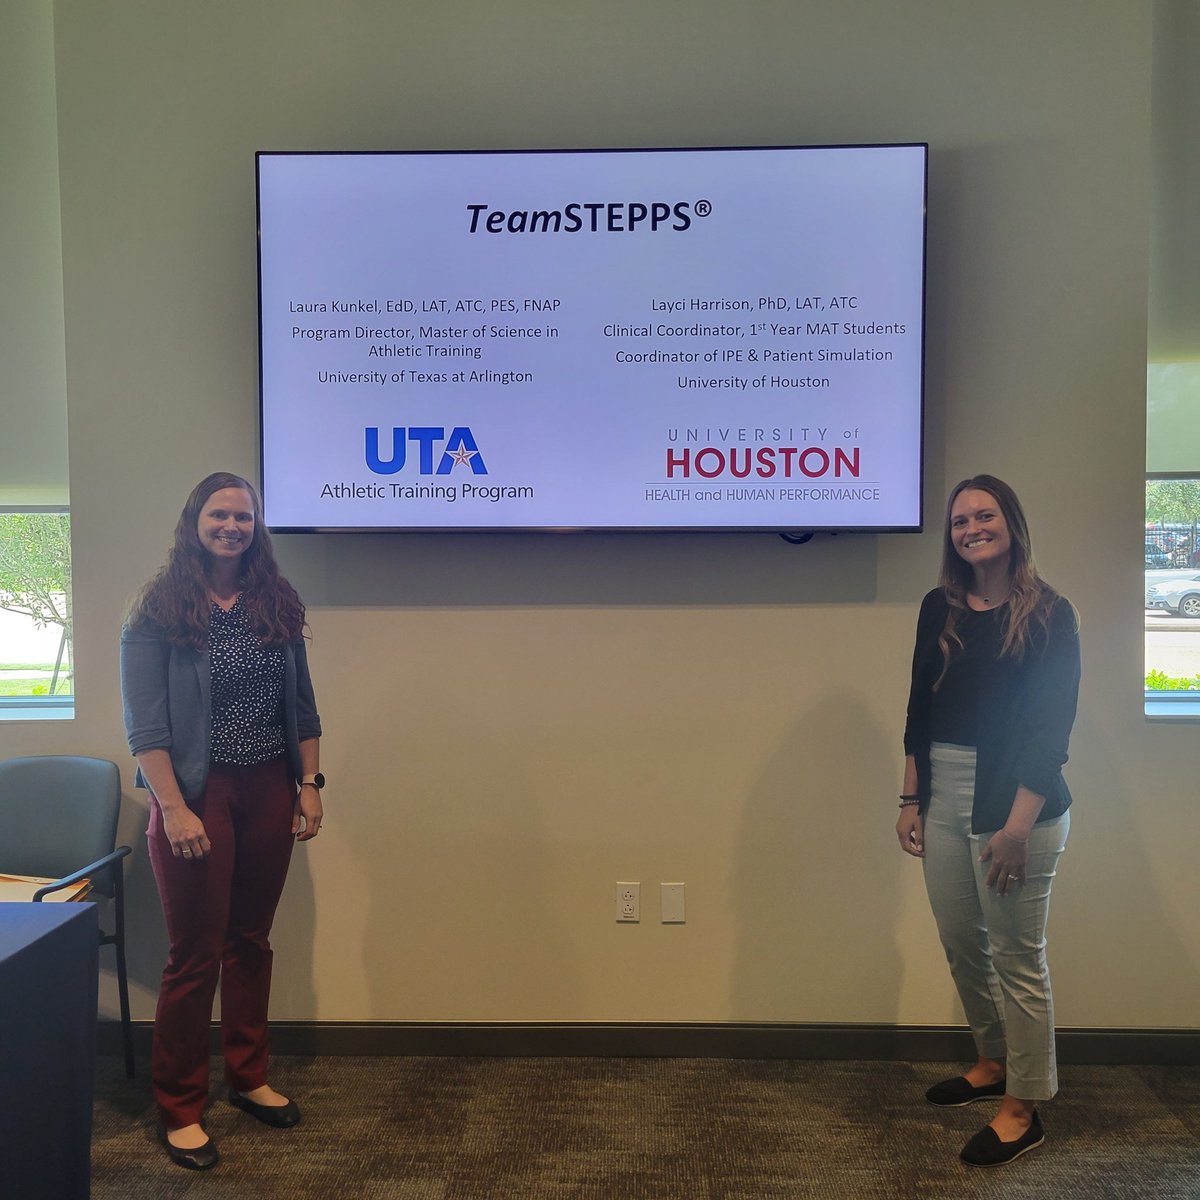 Thank you to Houston Methodist Sports Medicine for having me and Layci for a full TeamSTEPPS workshop today. The participants were wonderful to work with and I had a great time!